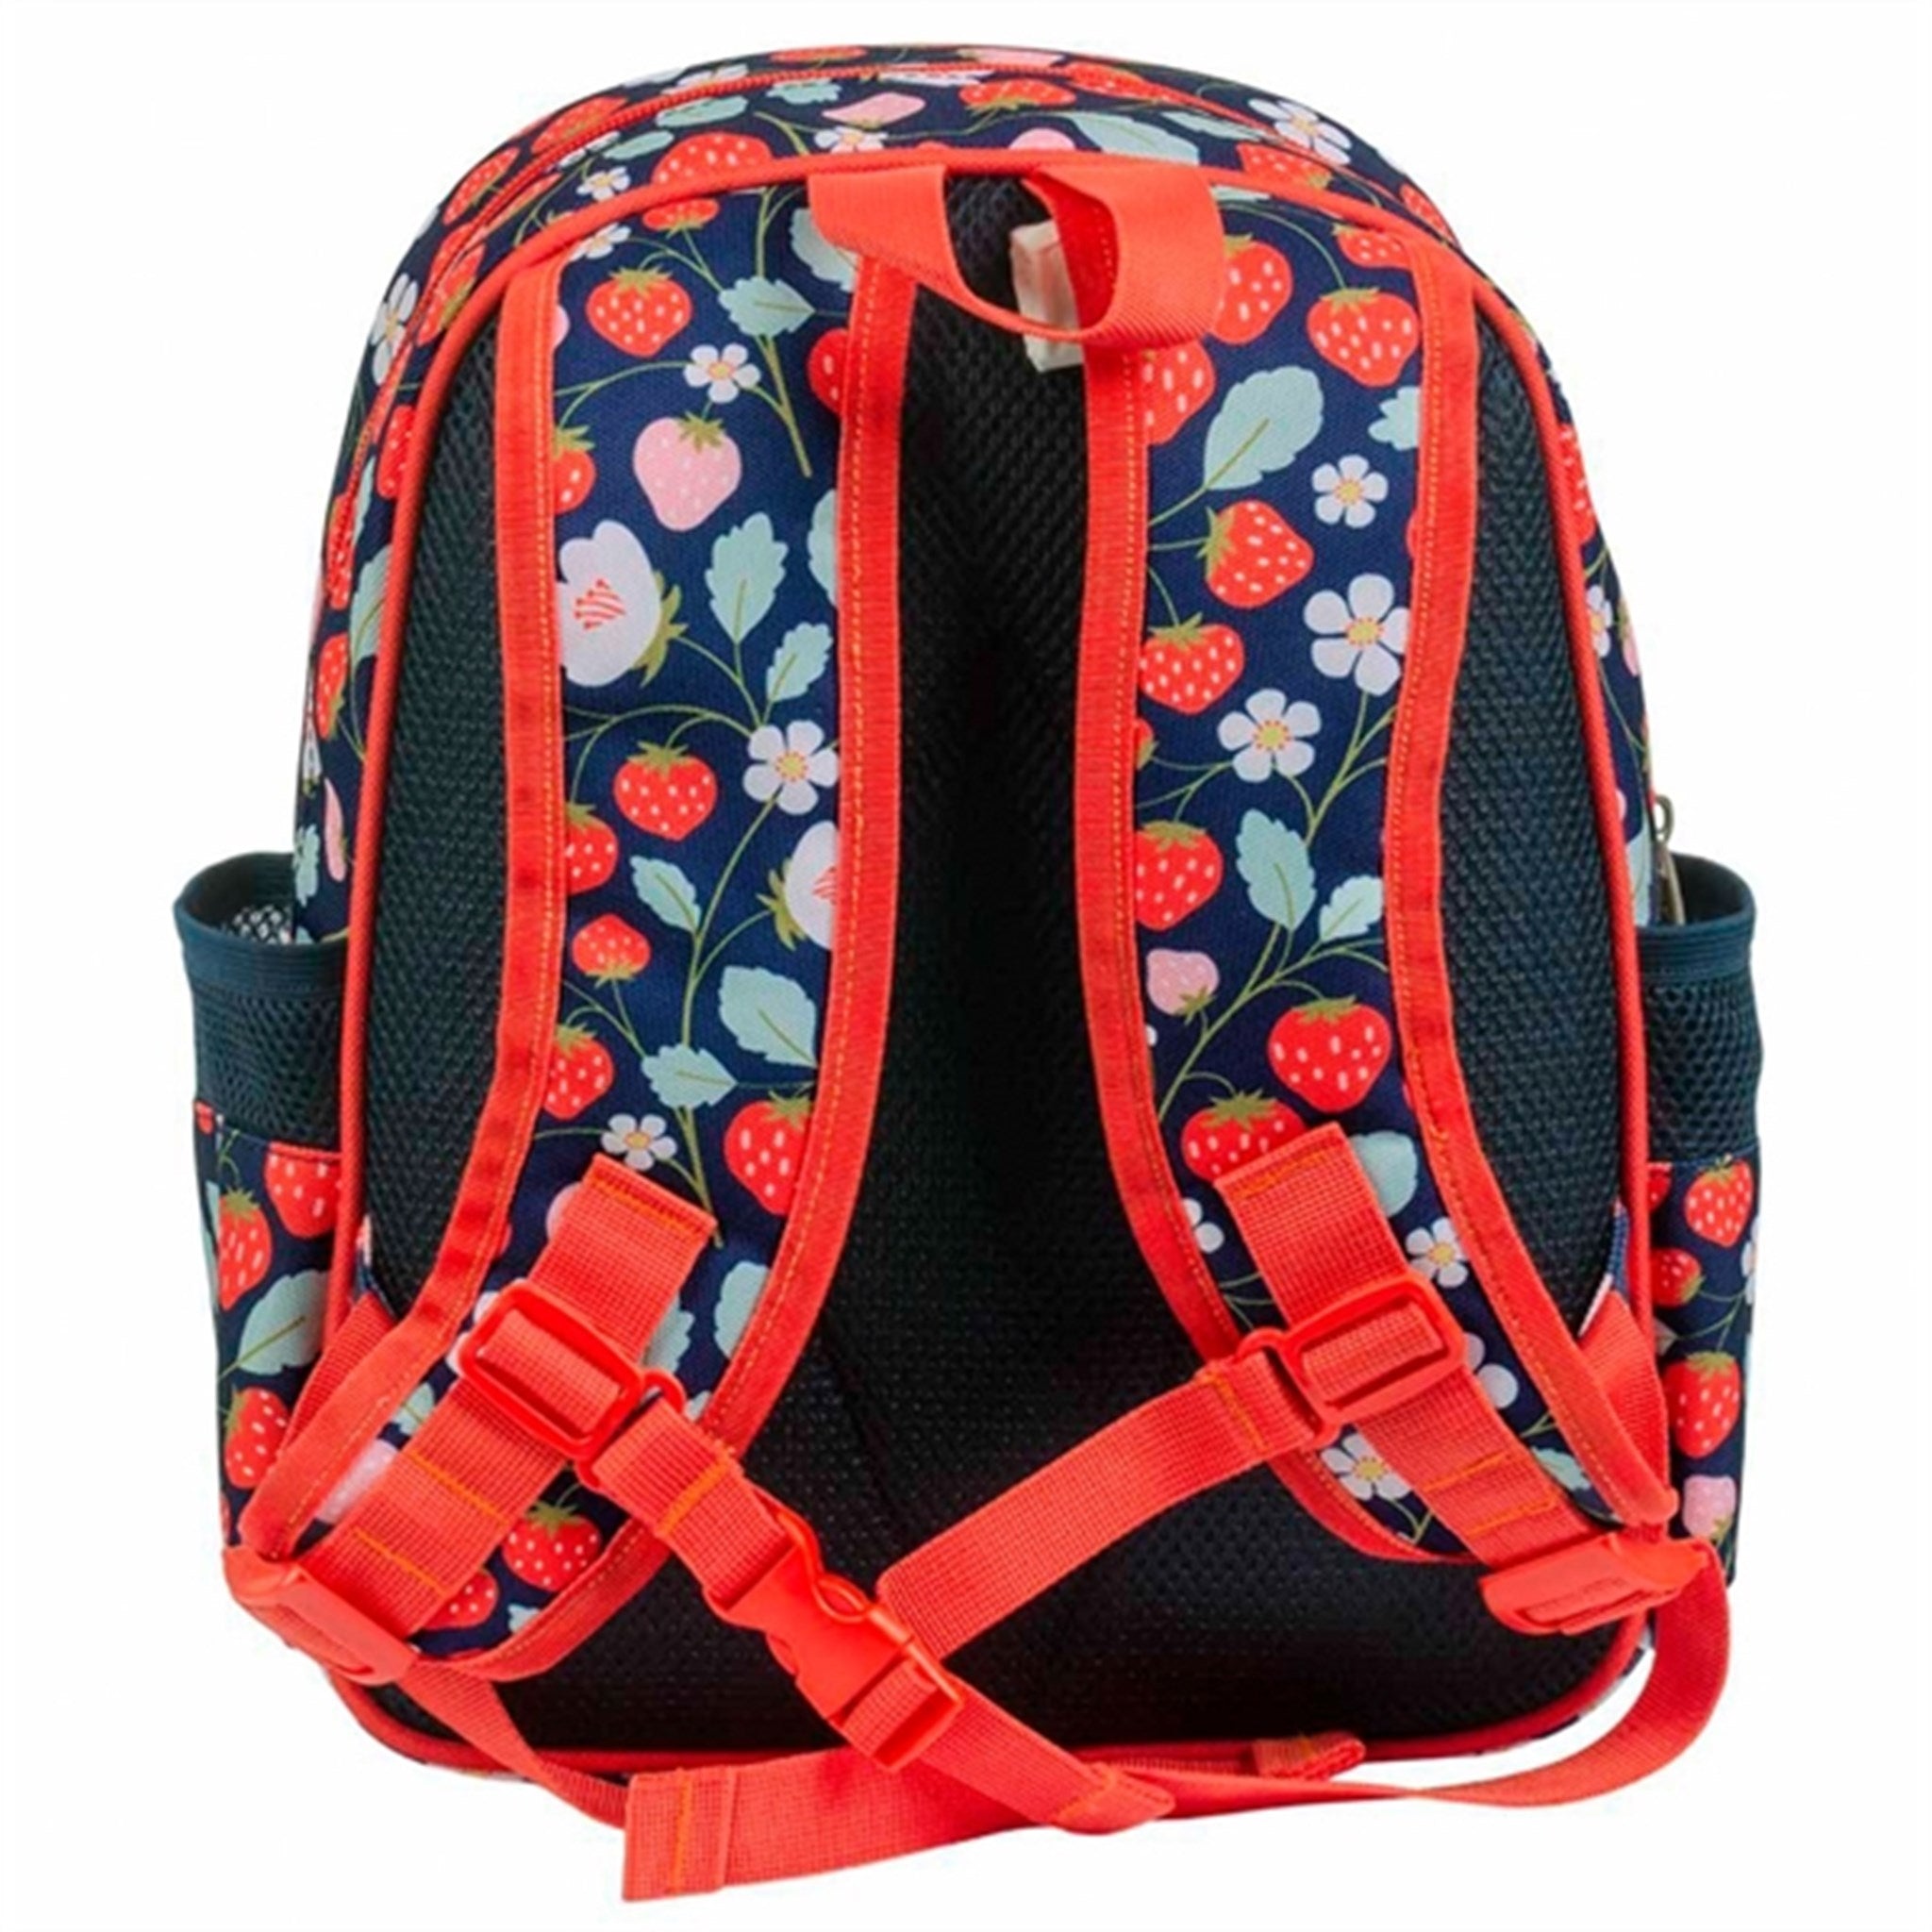 A Little Lovely Company Backpack Strawberries 3